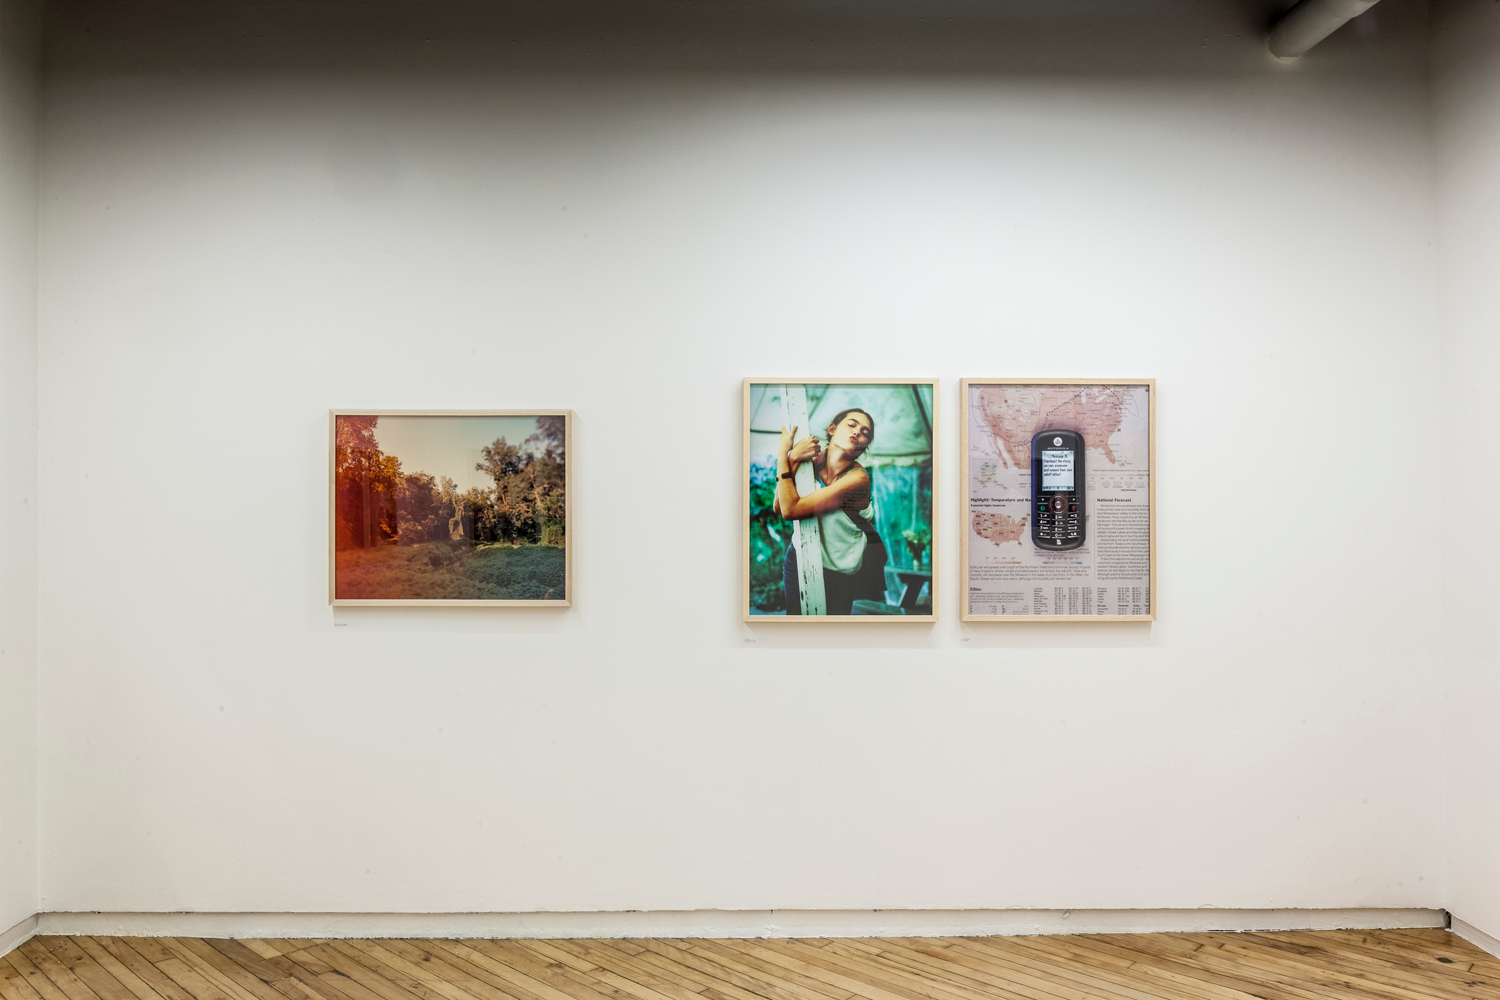     Installation view of Guillaume Simoneau, Love and War, Photo: Toni Hafkenscheid

